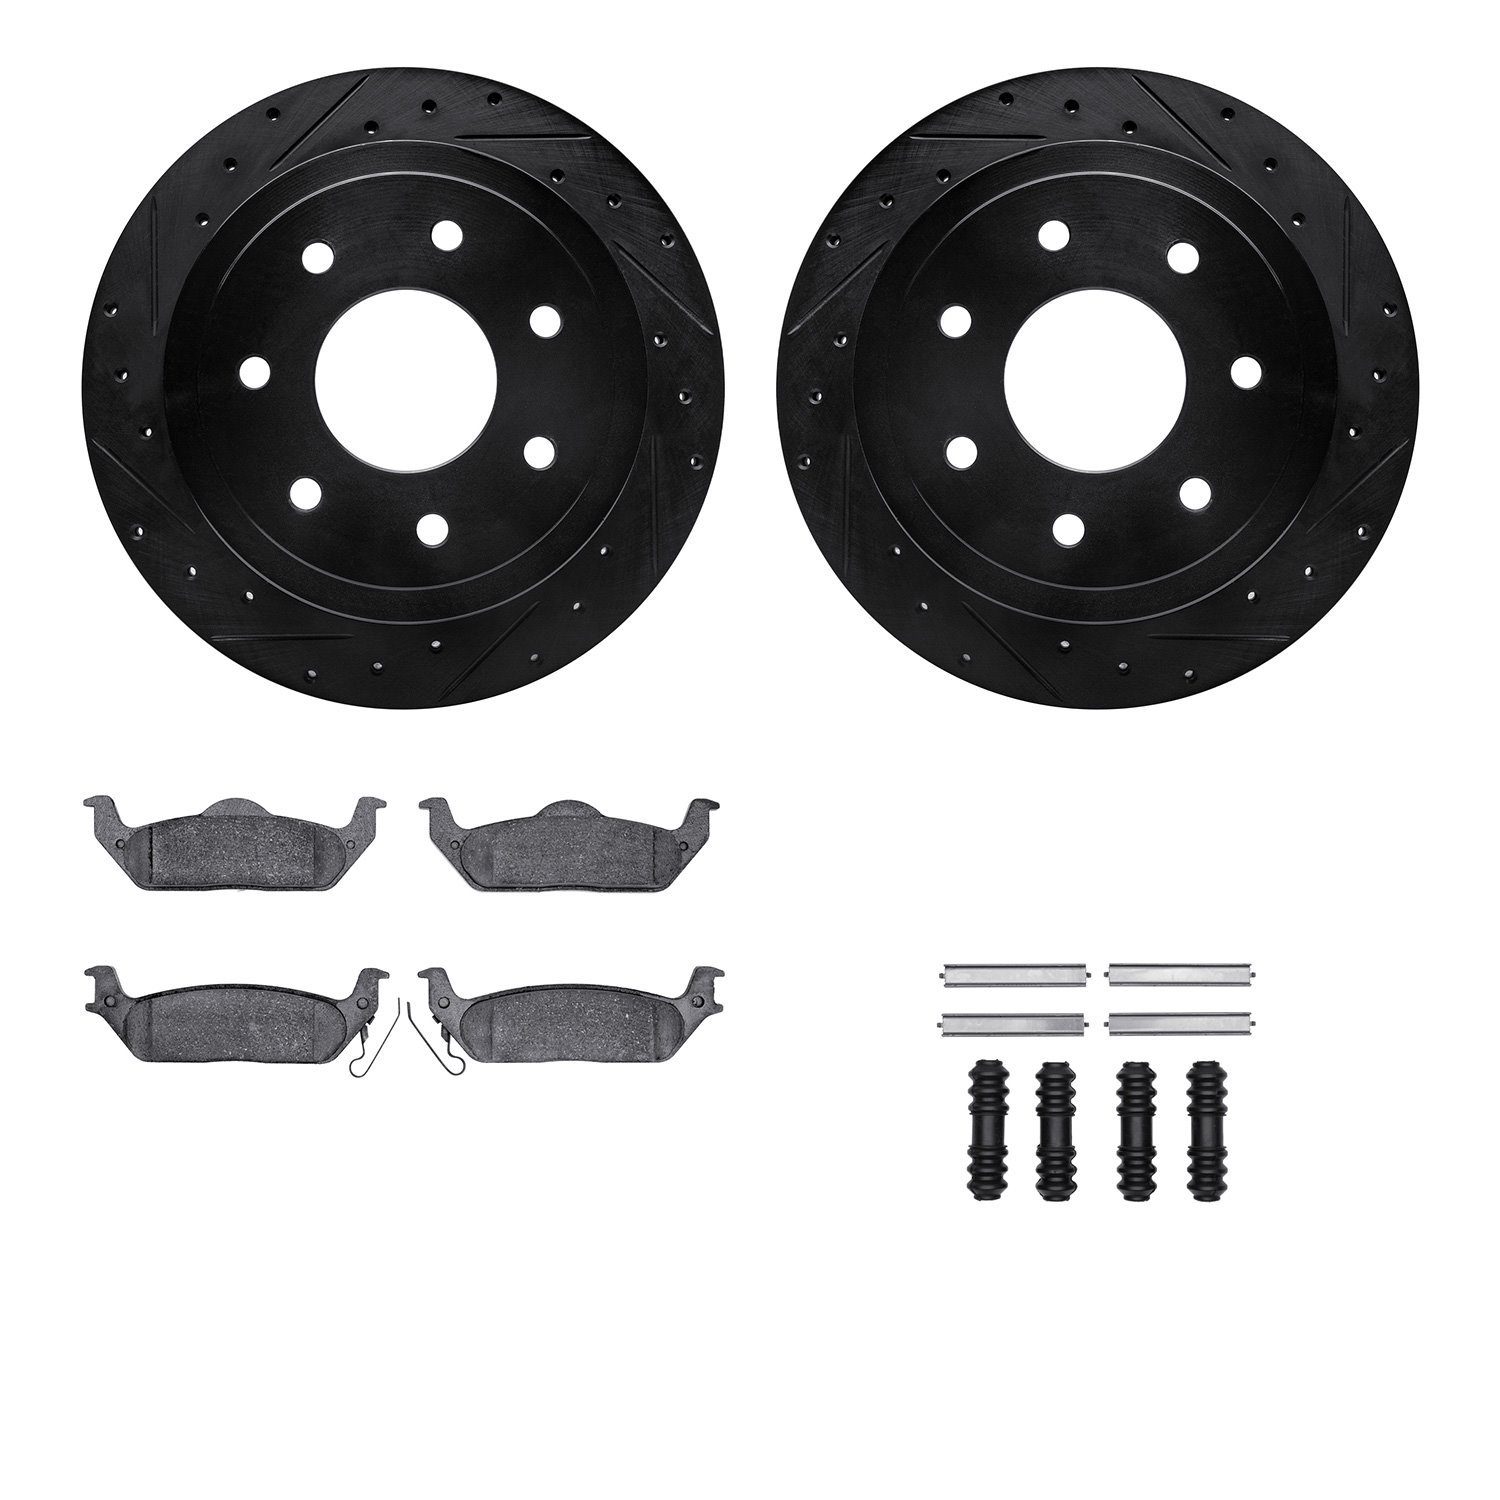 8412-54076 Drilled/Slotted Brake Rotors with Ultimate-Duty Brake Pads Kit & Hardware [Black], 2004-2011 Ford/Lincoln/Mercury/Maz